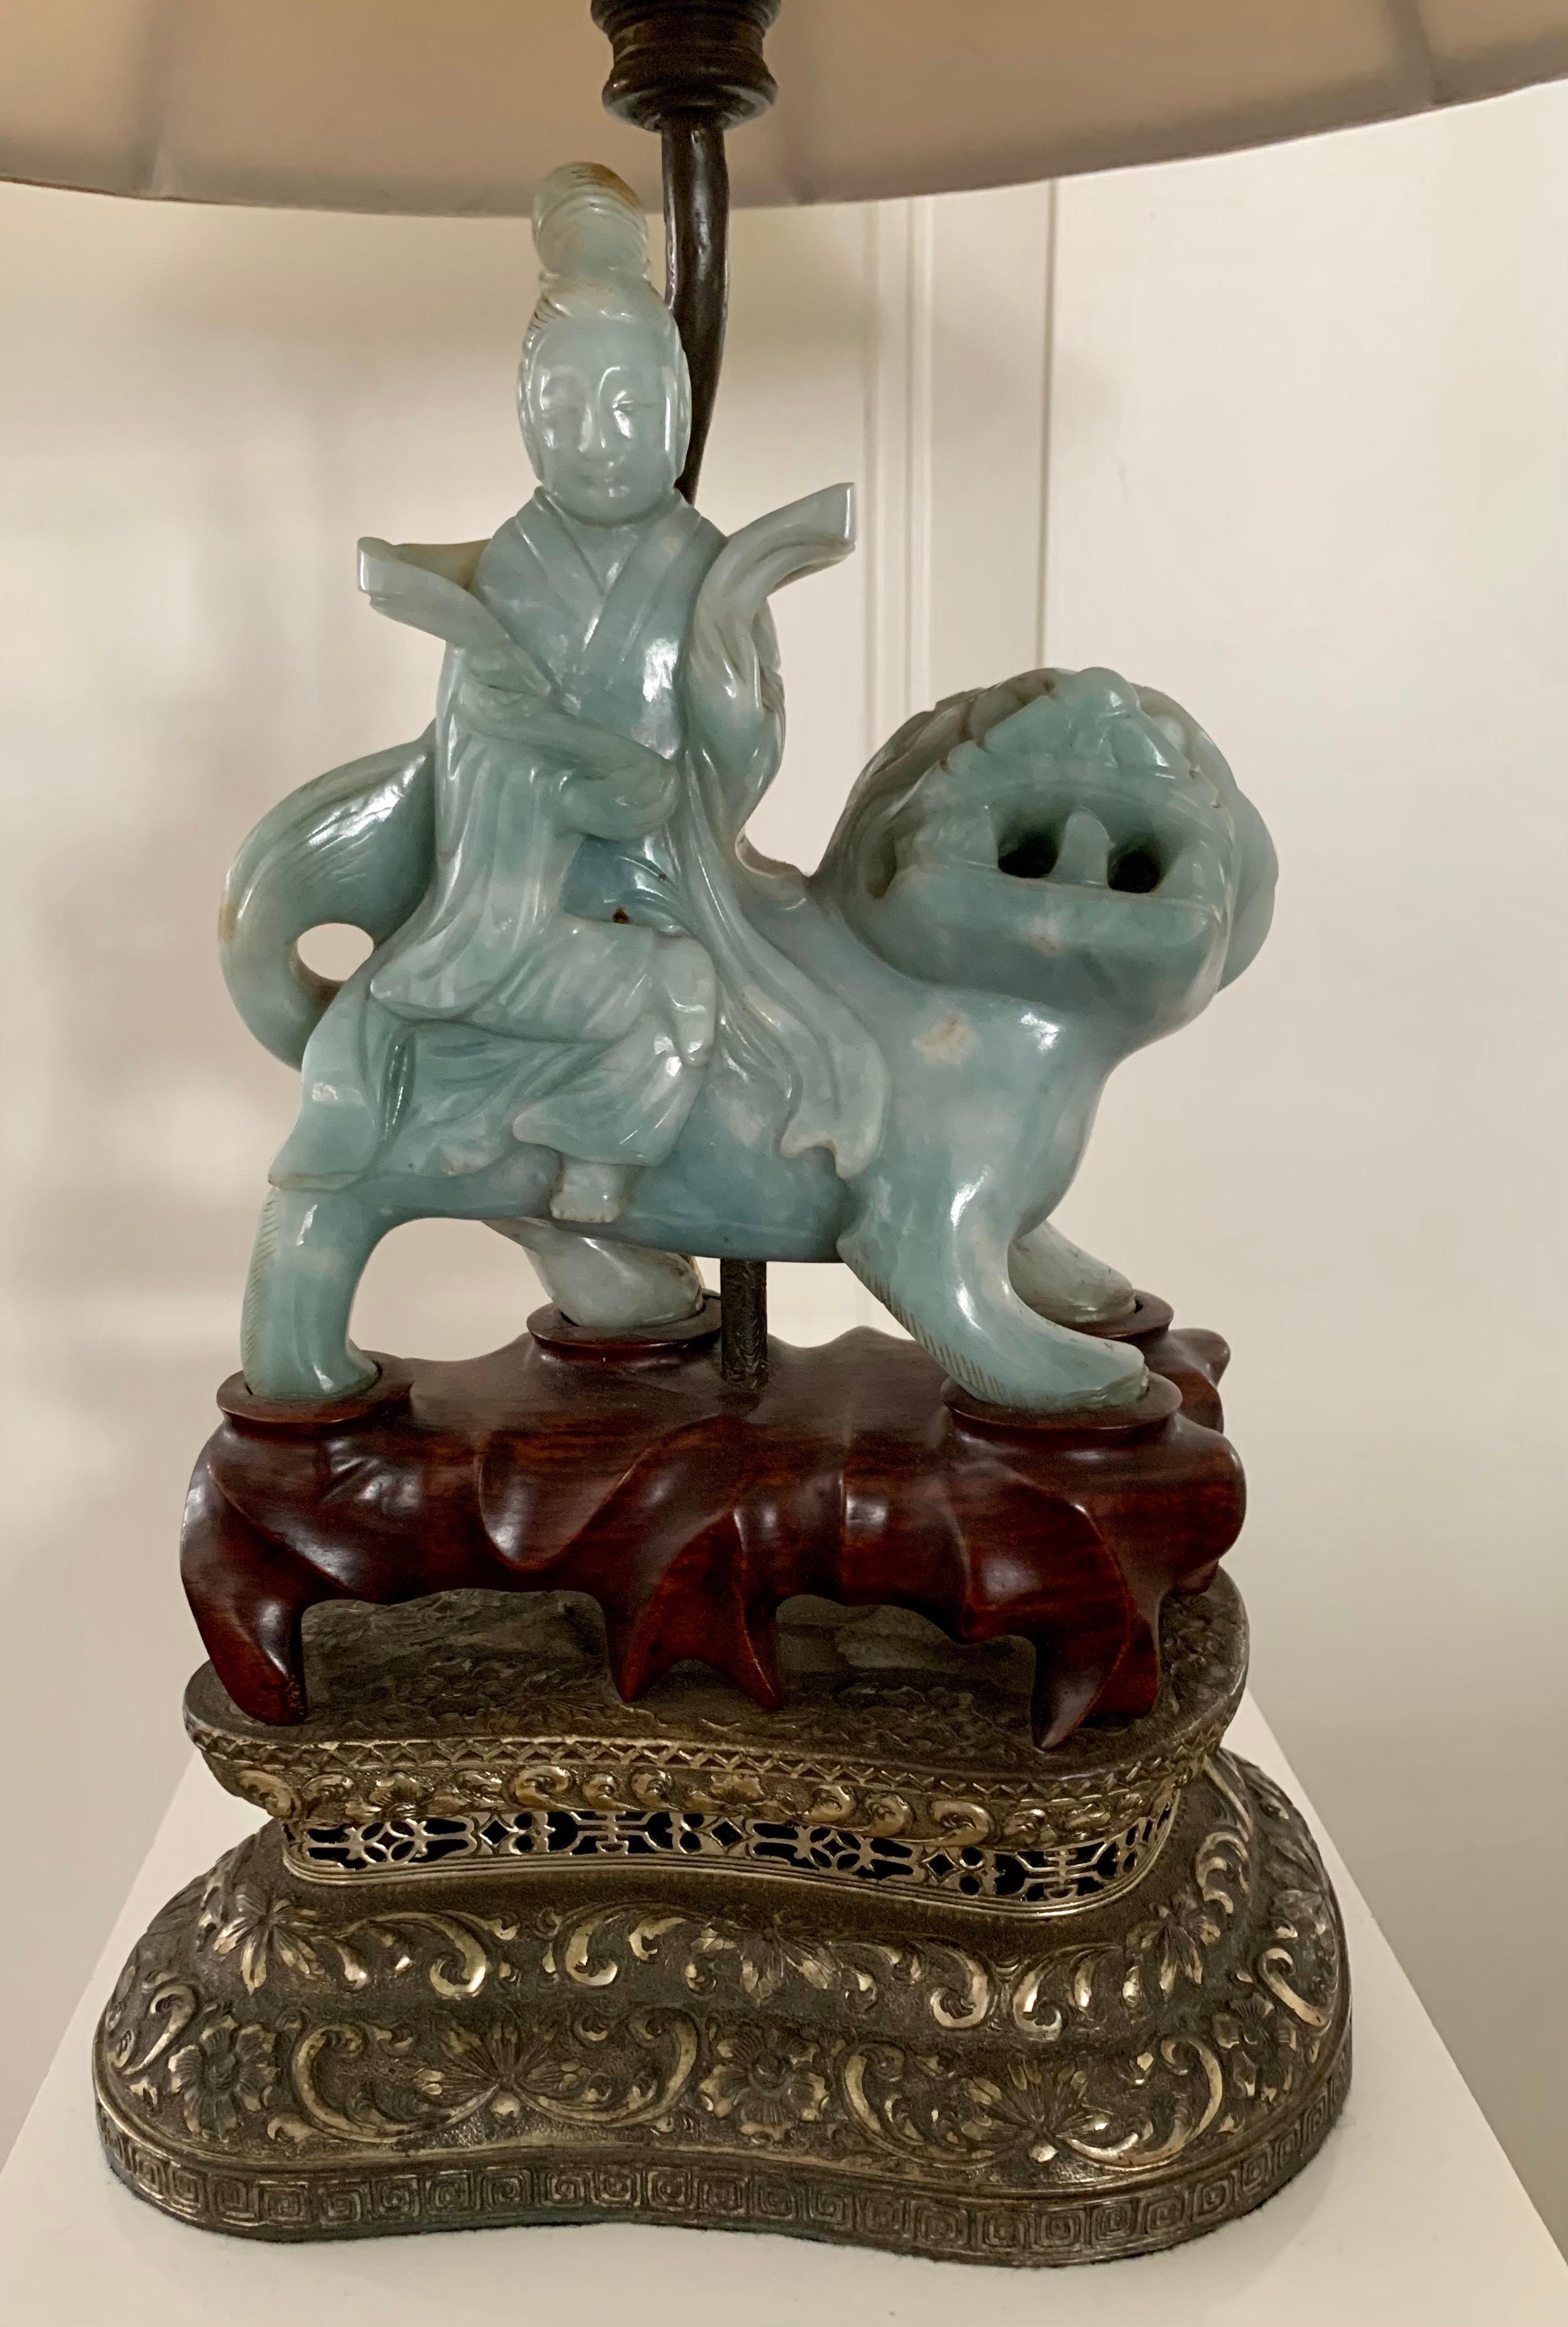 Late 19th century carved jade lamp of a chinese figure sitting on a foo dog. It sits on a carved rosewood and pierced brass base. Comes with shade and carved finial. Use with or without silk shade.
Take one standard bulb.
Measures: 26.5” H to top